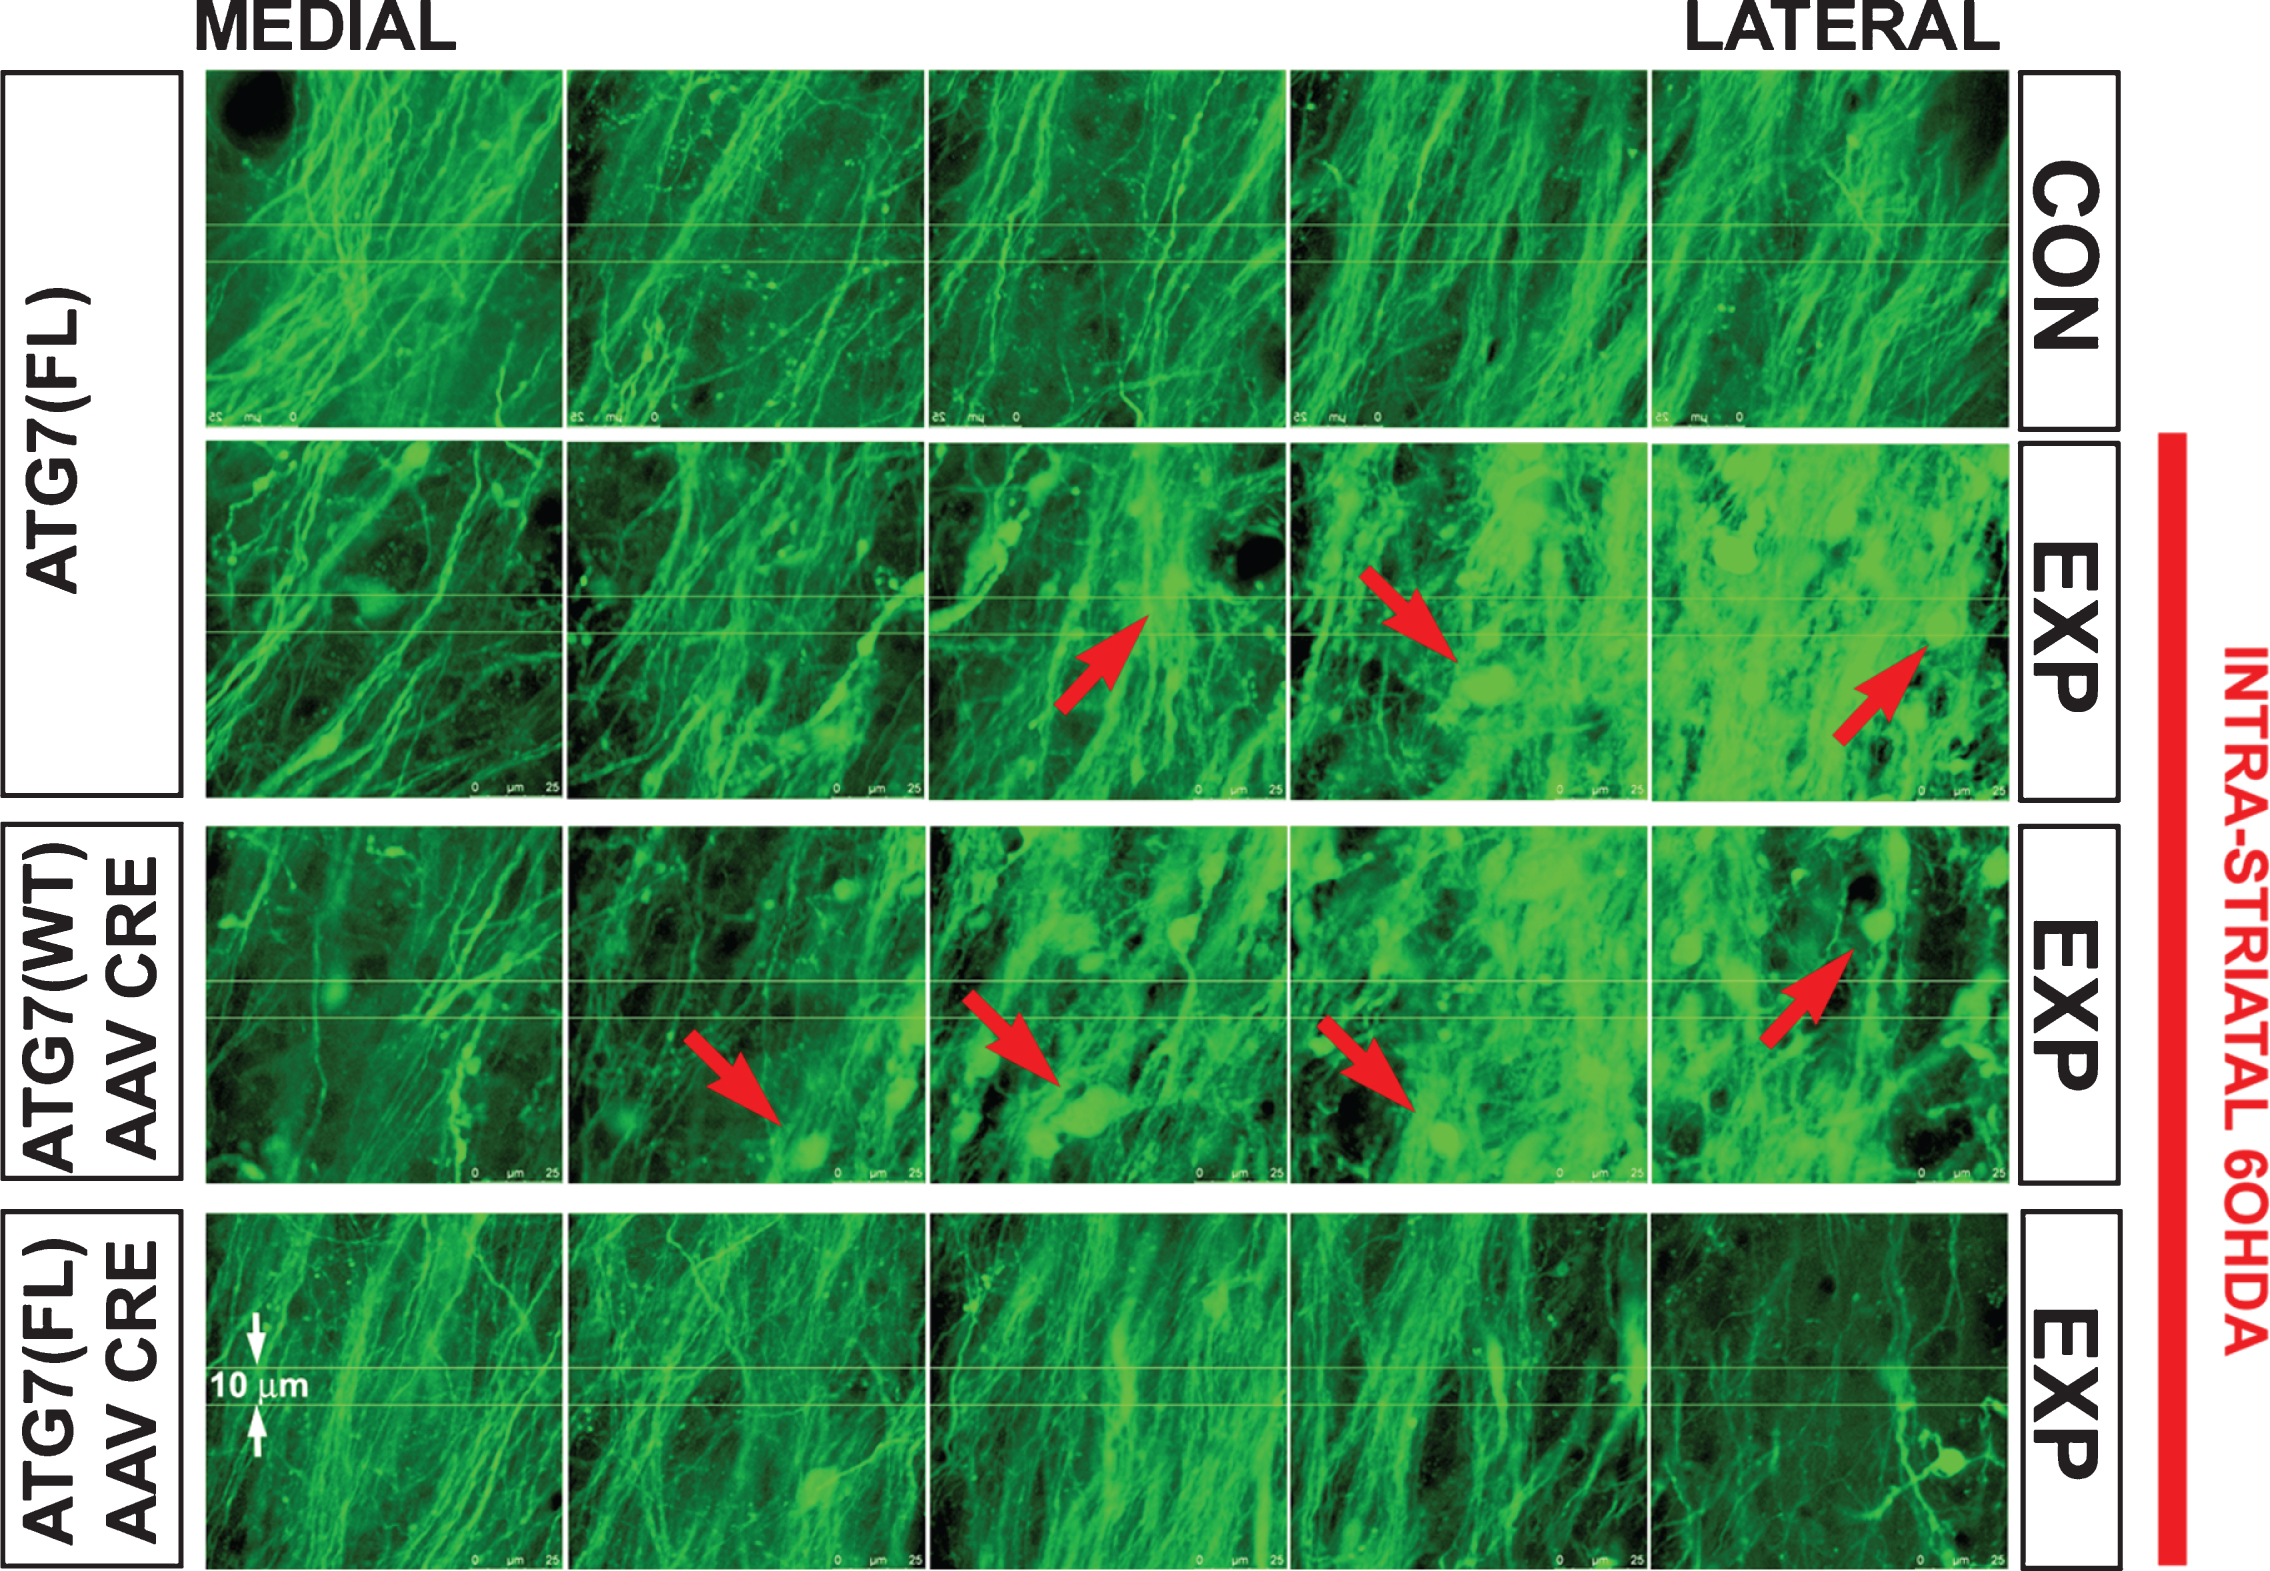 Each panel shows nigrostriatal axons in the MFB visualized by confocal microscopy in TH-GFP mice. Following deletion of Atg7, axons of SNpc dopamine neurons are resistant to retrograde axon degeneration. In the absence of AAV Cre injection, Atg7fl/fl:TH-GFP mice show a loss of MFB dopaminergic axons, and the appearance of axonal spheroid pathology (red arrows) following unilateral 6OHDA injection. Atg7wt/wt:TH-GFP mice injected with AAV Cre show a similar axon loss and pathology. However, following injection of AAV Cre, Atg7fl/fl:TH-GFP mice show minimal axon loss and pathology following 6OHDA injection. Atg7fl/fl:TH-GFP mice without AAV Cre (n = 5) and Atg7wt/wt:TH-GFP mice given AAV Cre (n = 6) show a mean loss of 31 (or 32% ) and 32 (or 34% ) MFB axons respectively, whereas Atg7fl/fl:TH-GFP mice treated with AAV Cre (n = 6) show a mean loss of only 5 (or 5% ) (p <  0.001, ANOVA).